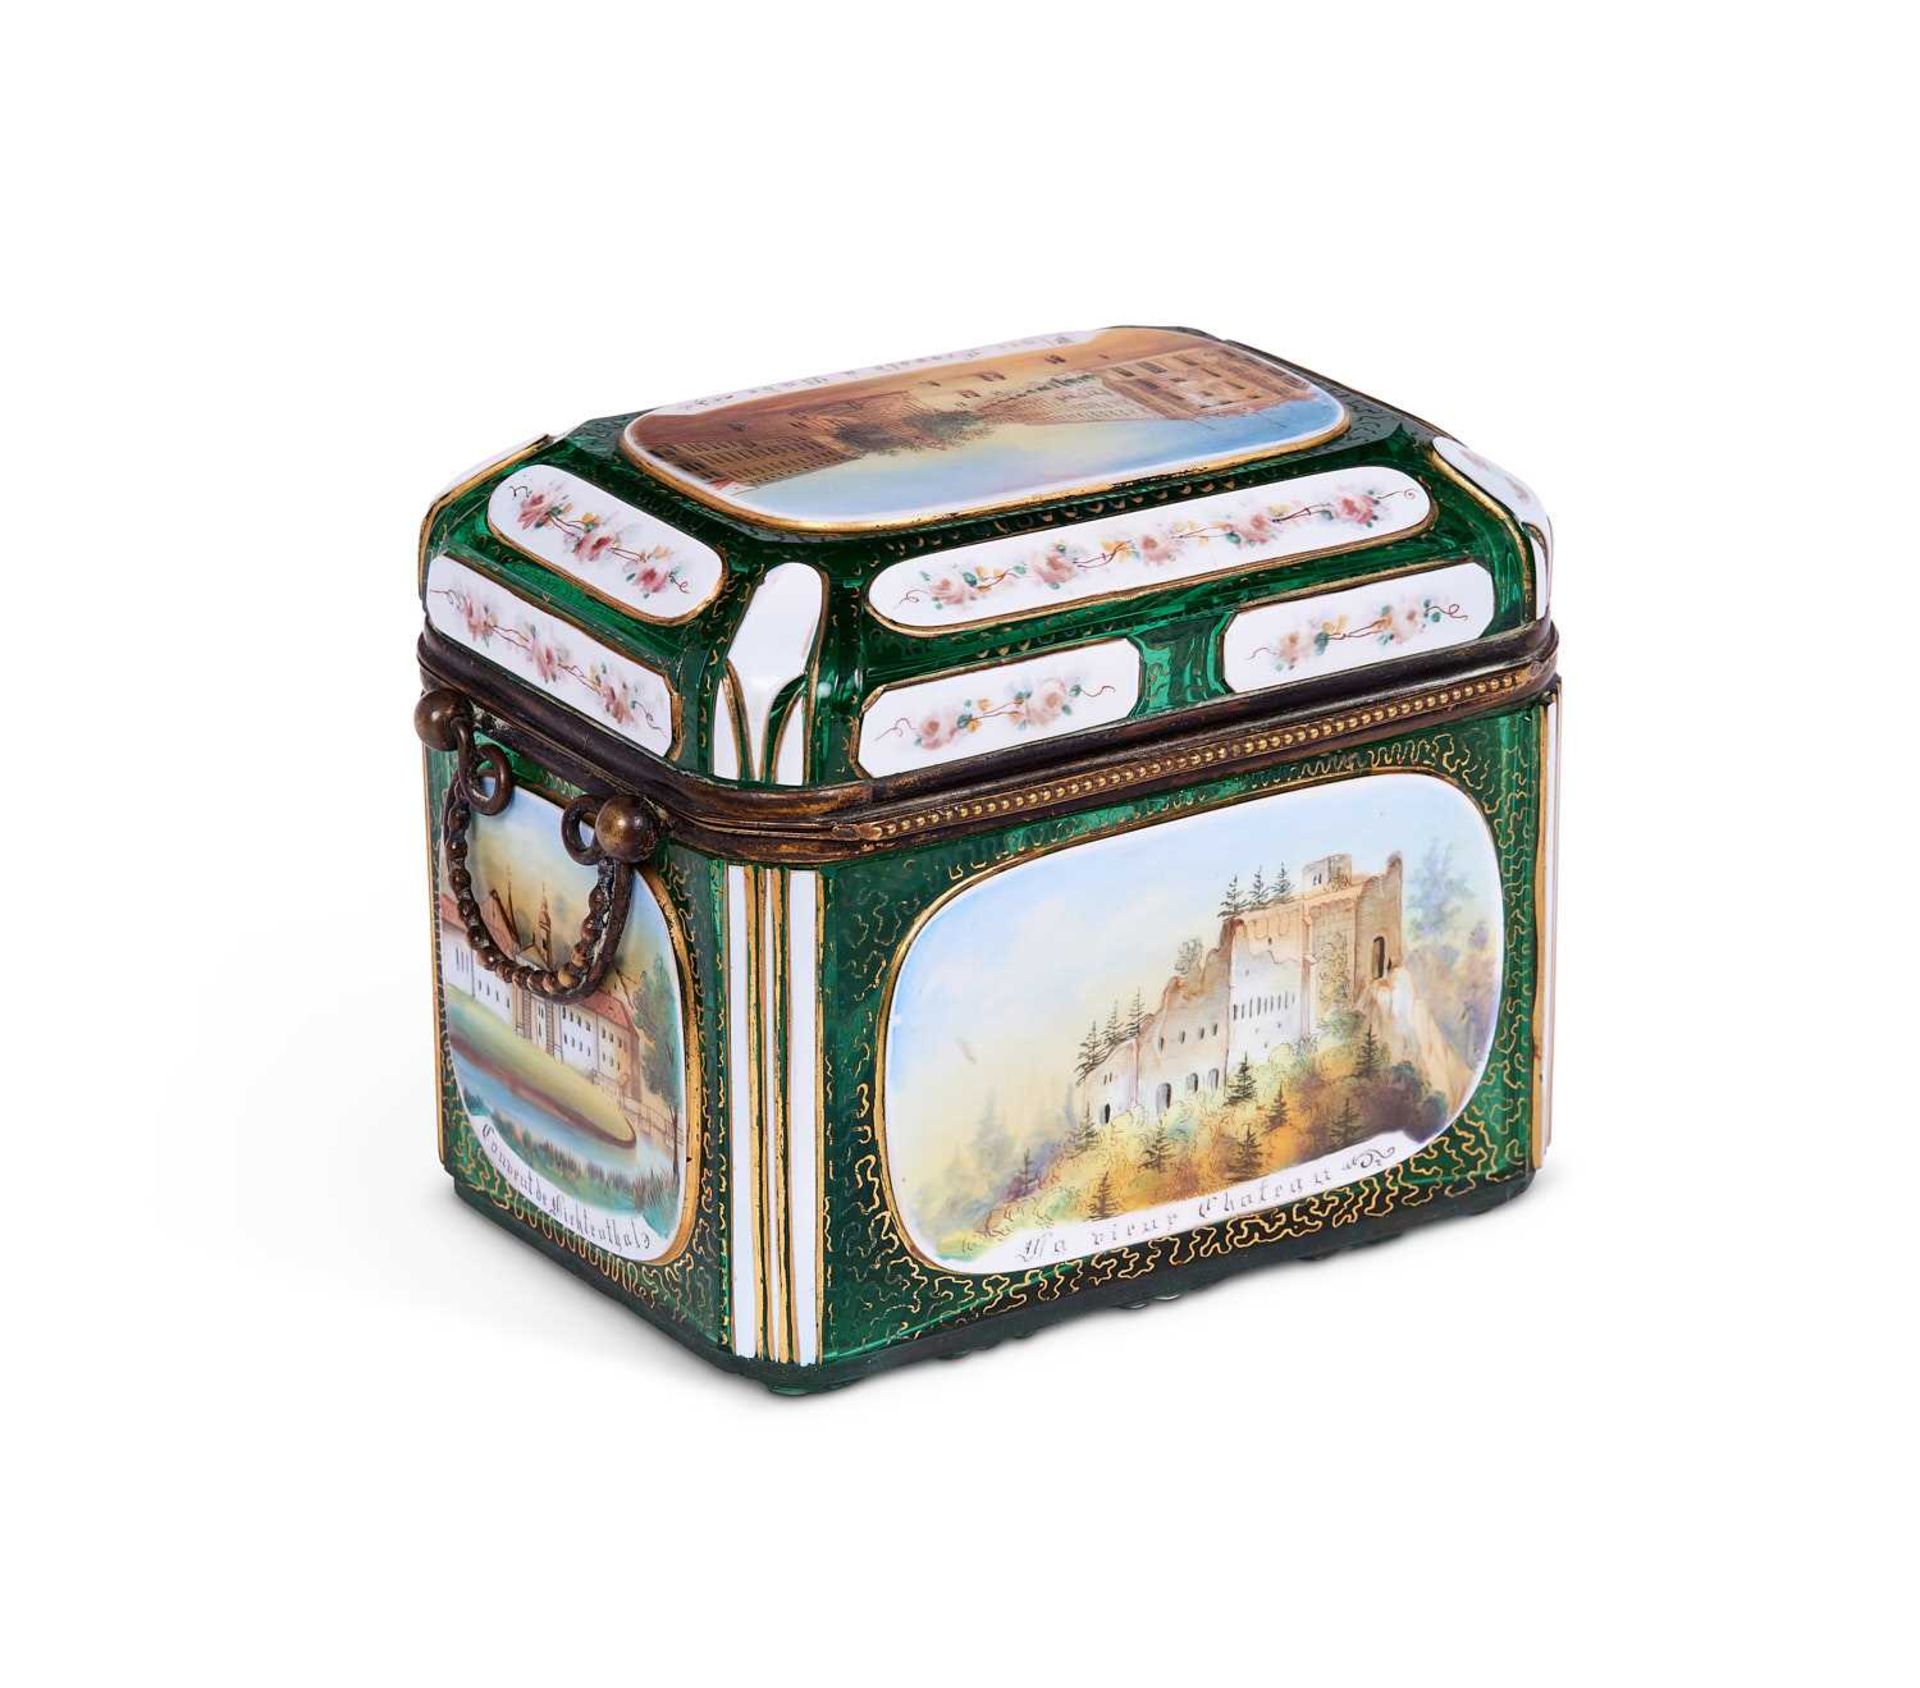 A FINE 19TH CENTURY BOHEMIAN OVERLAY GLASS CASKET PAINTED WITH SCENES OF BADEN-BADEN - Image 2 of 2